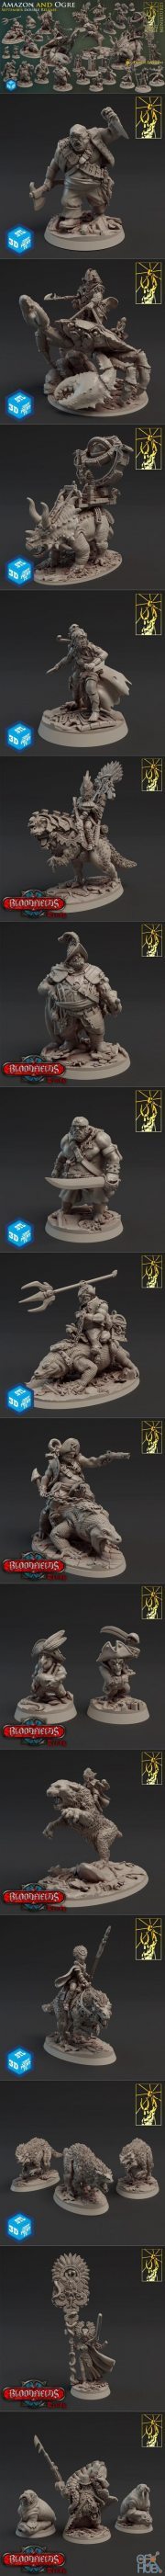 Amazons and Ogres – 3D Print